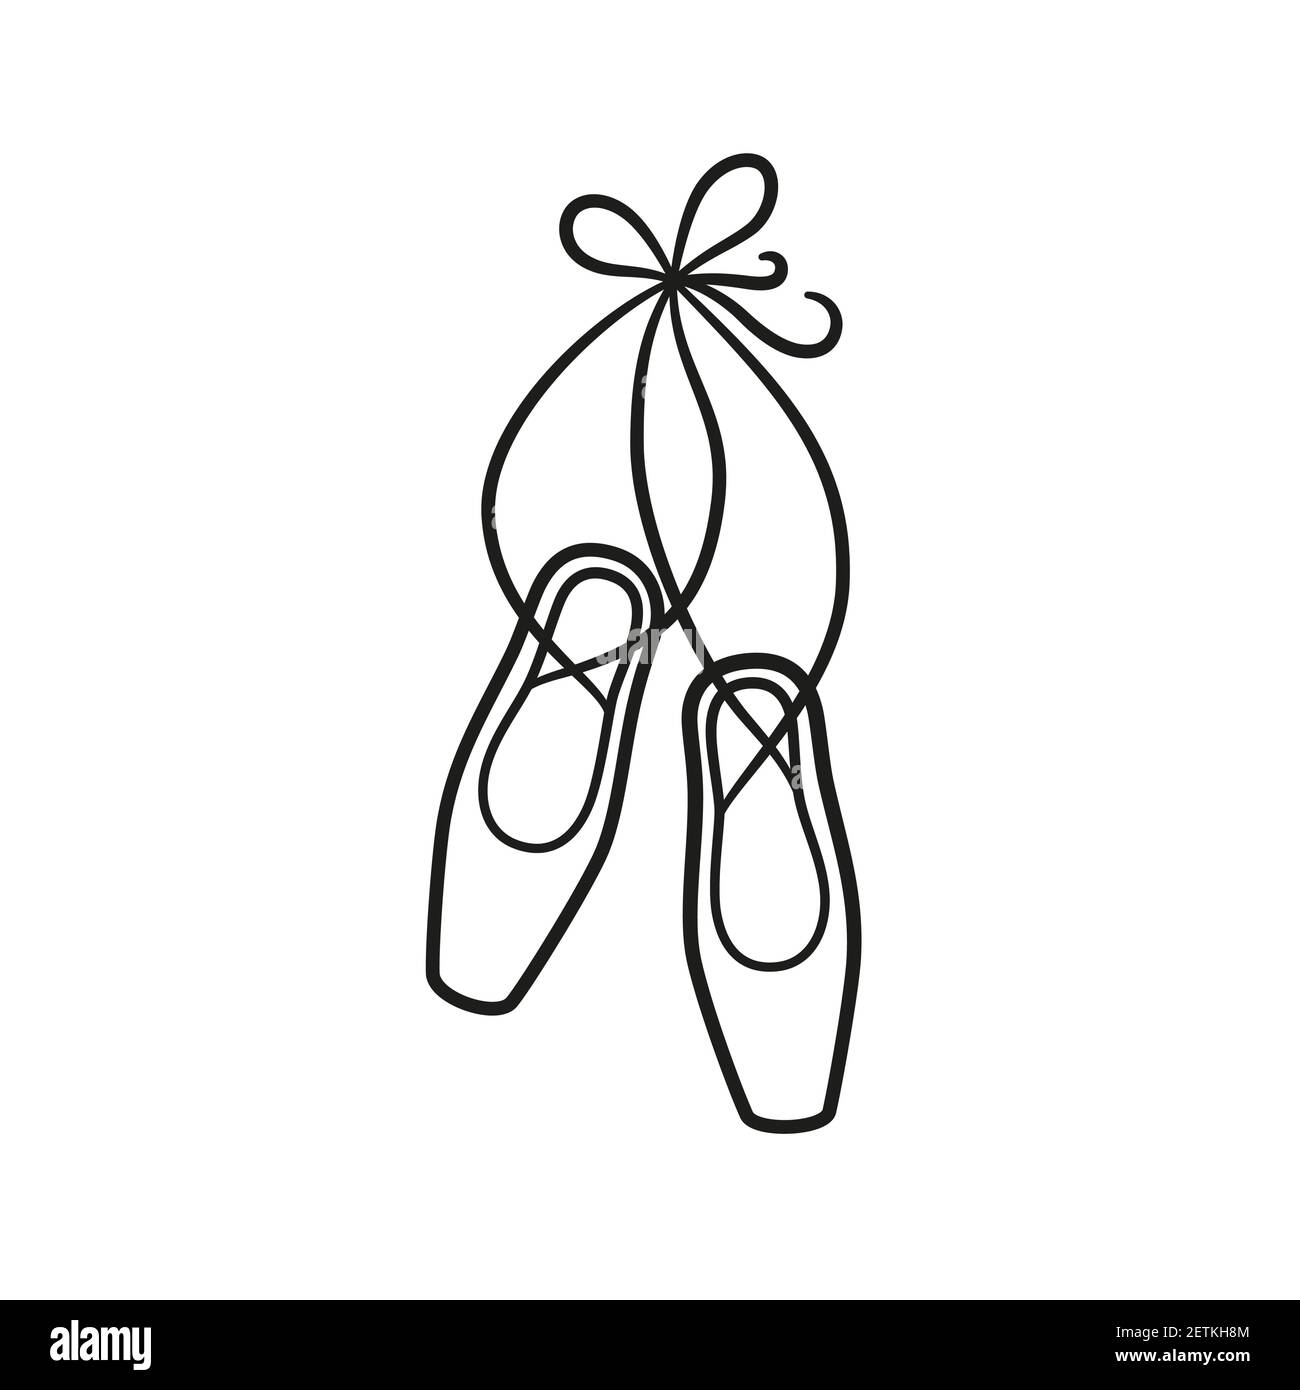 Ballet Shoes Greeting Card by Al Intindola